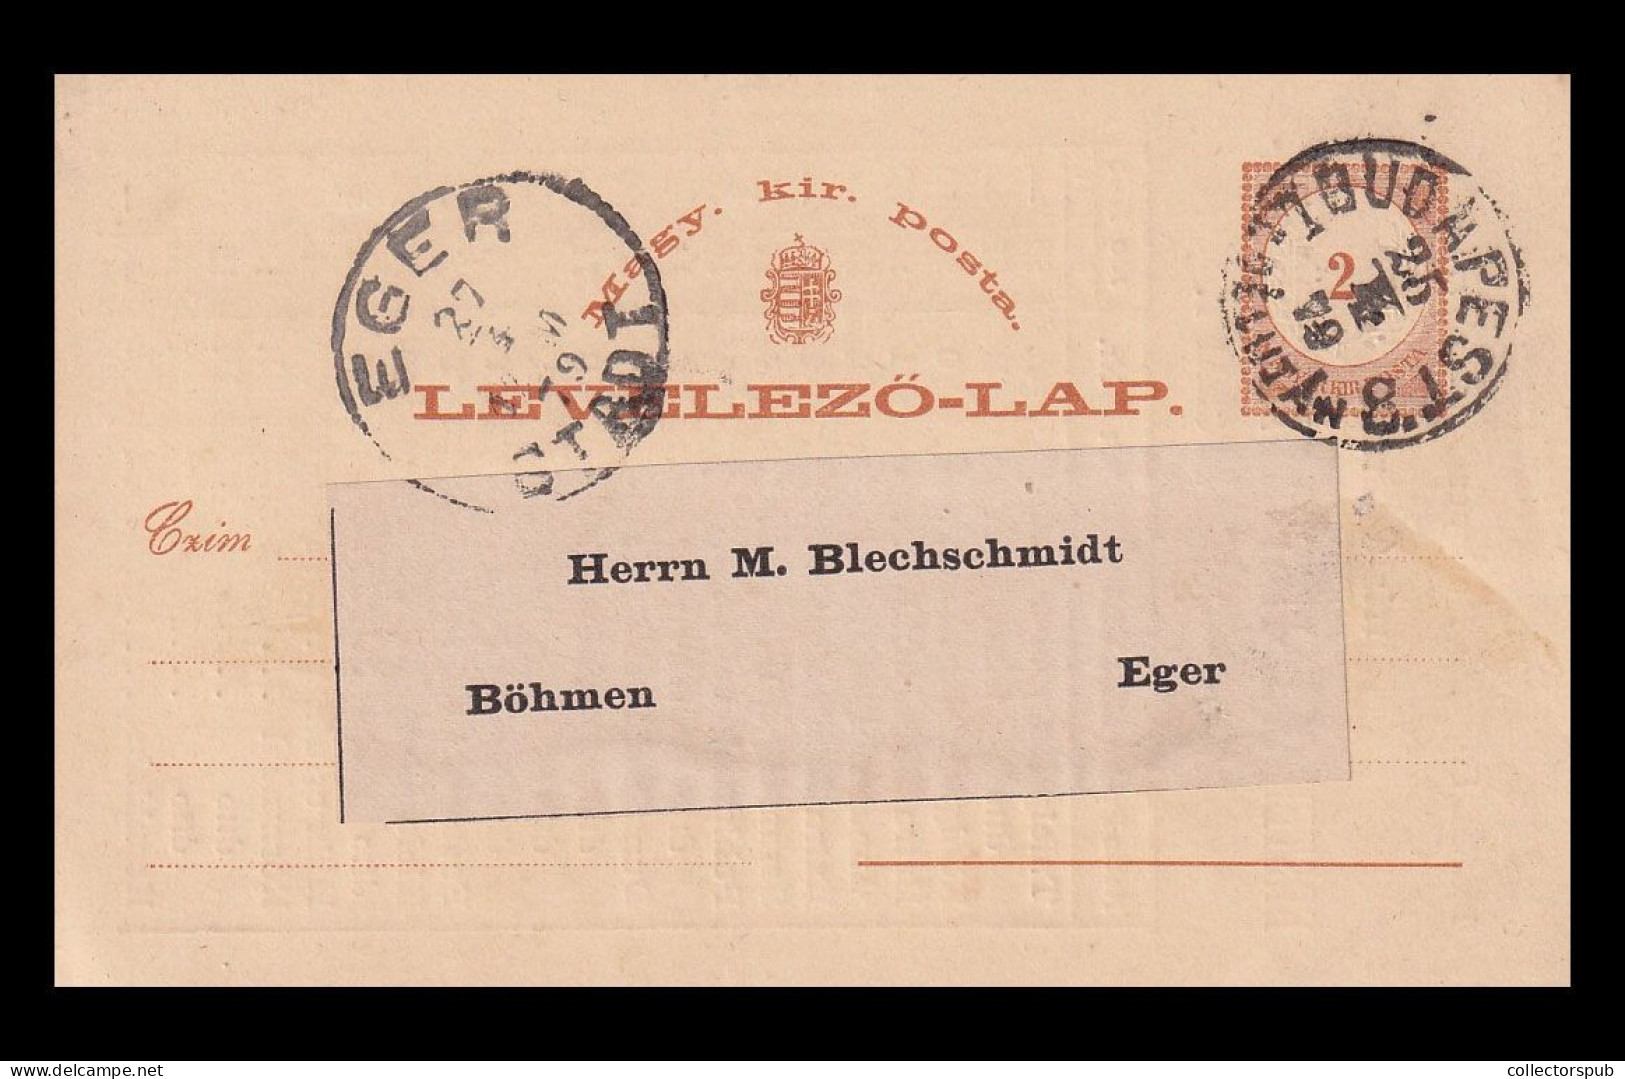 HUNGARY BUDAPEST 1879. PS Card Wioth Private Print - Postal Stationery